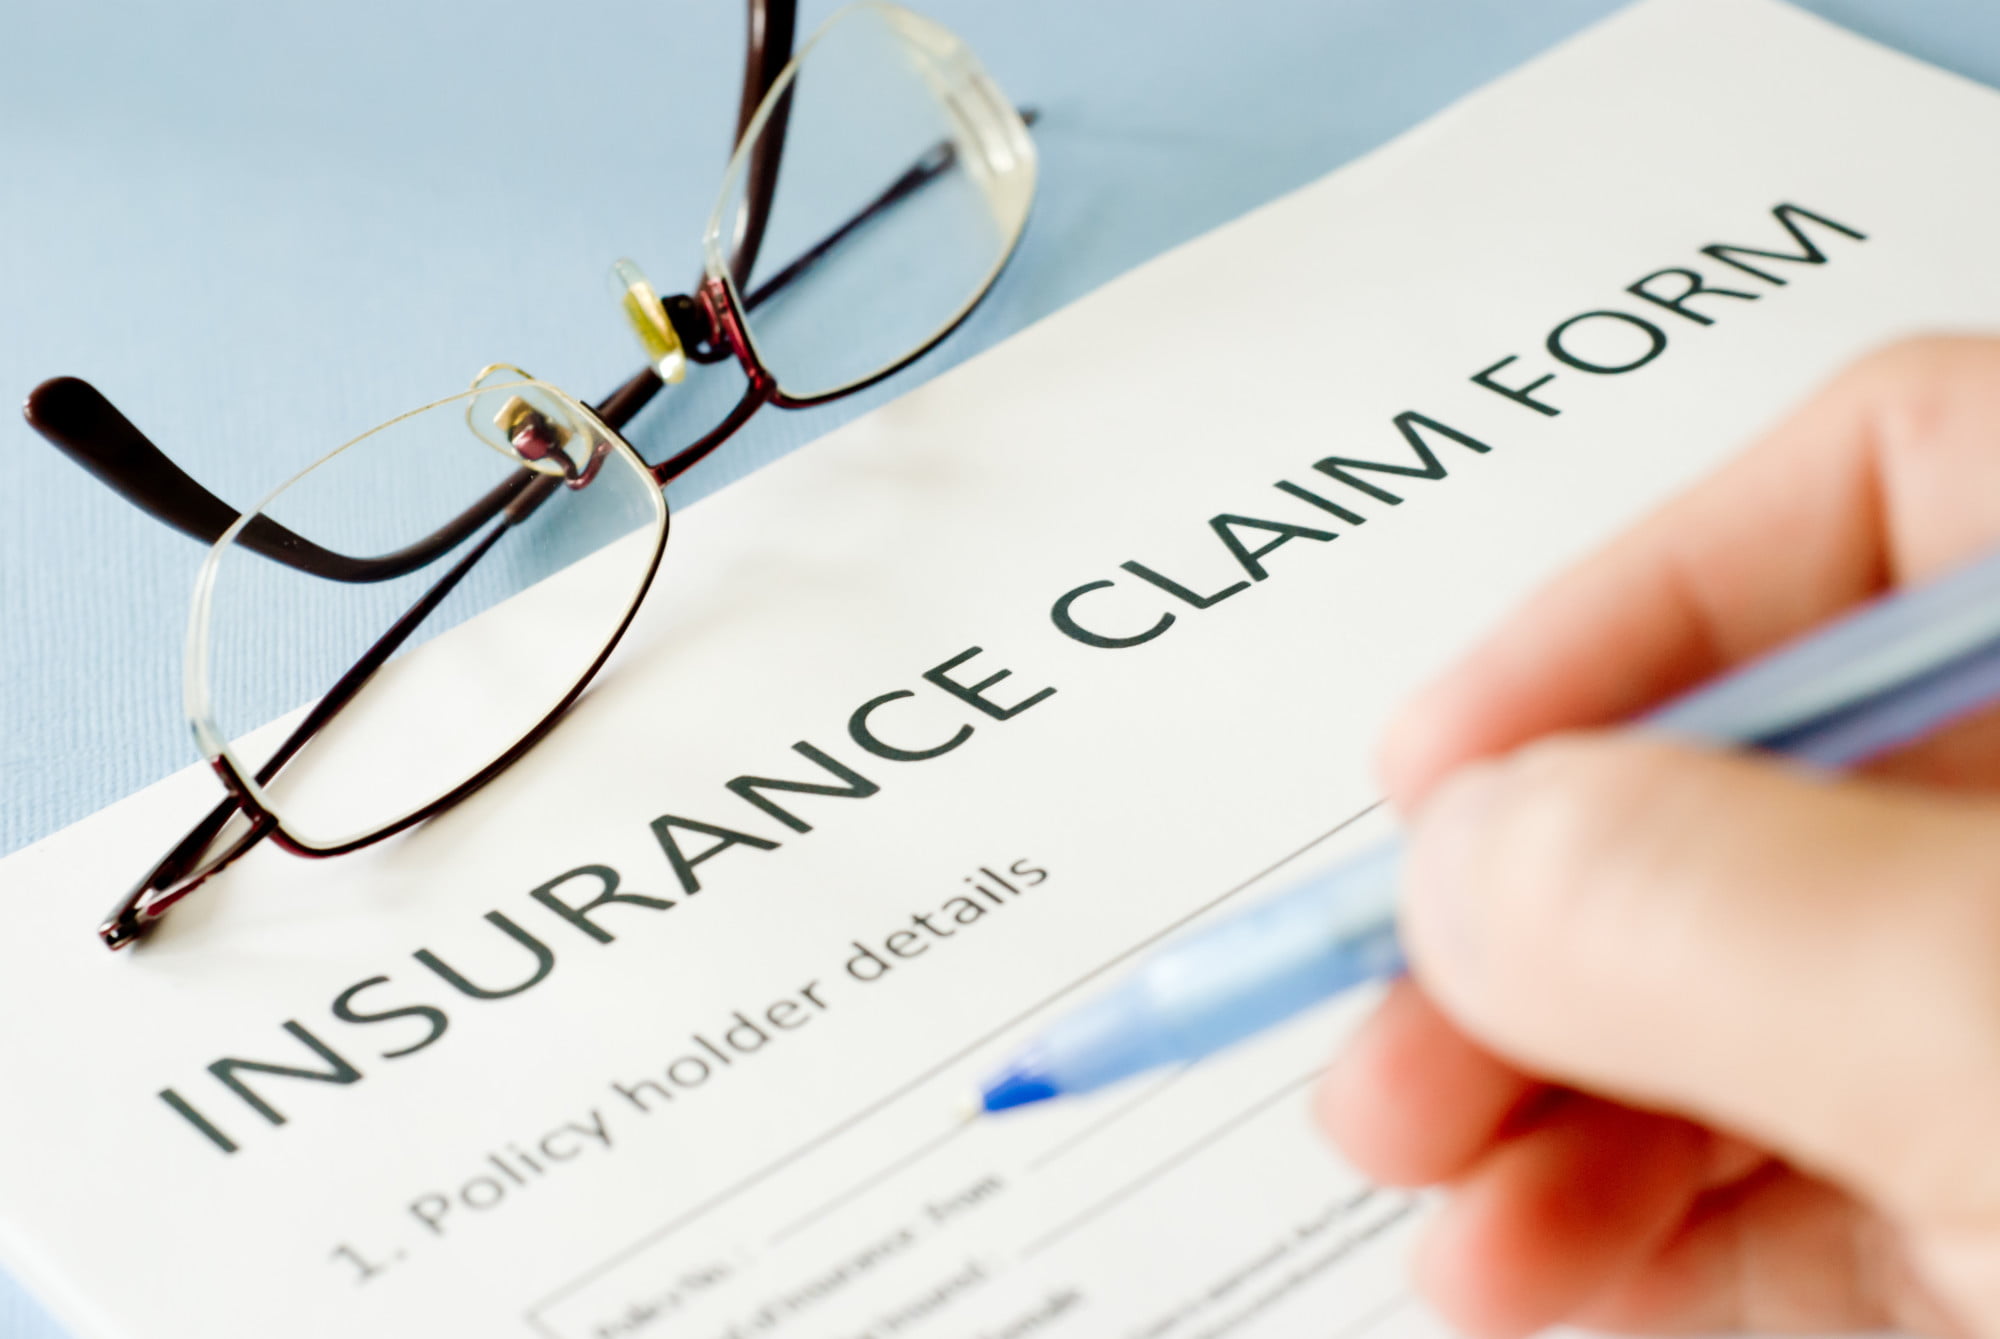 5 Car Insurance Claim Mistakes and How to Avoid Them